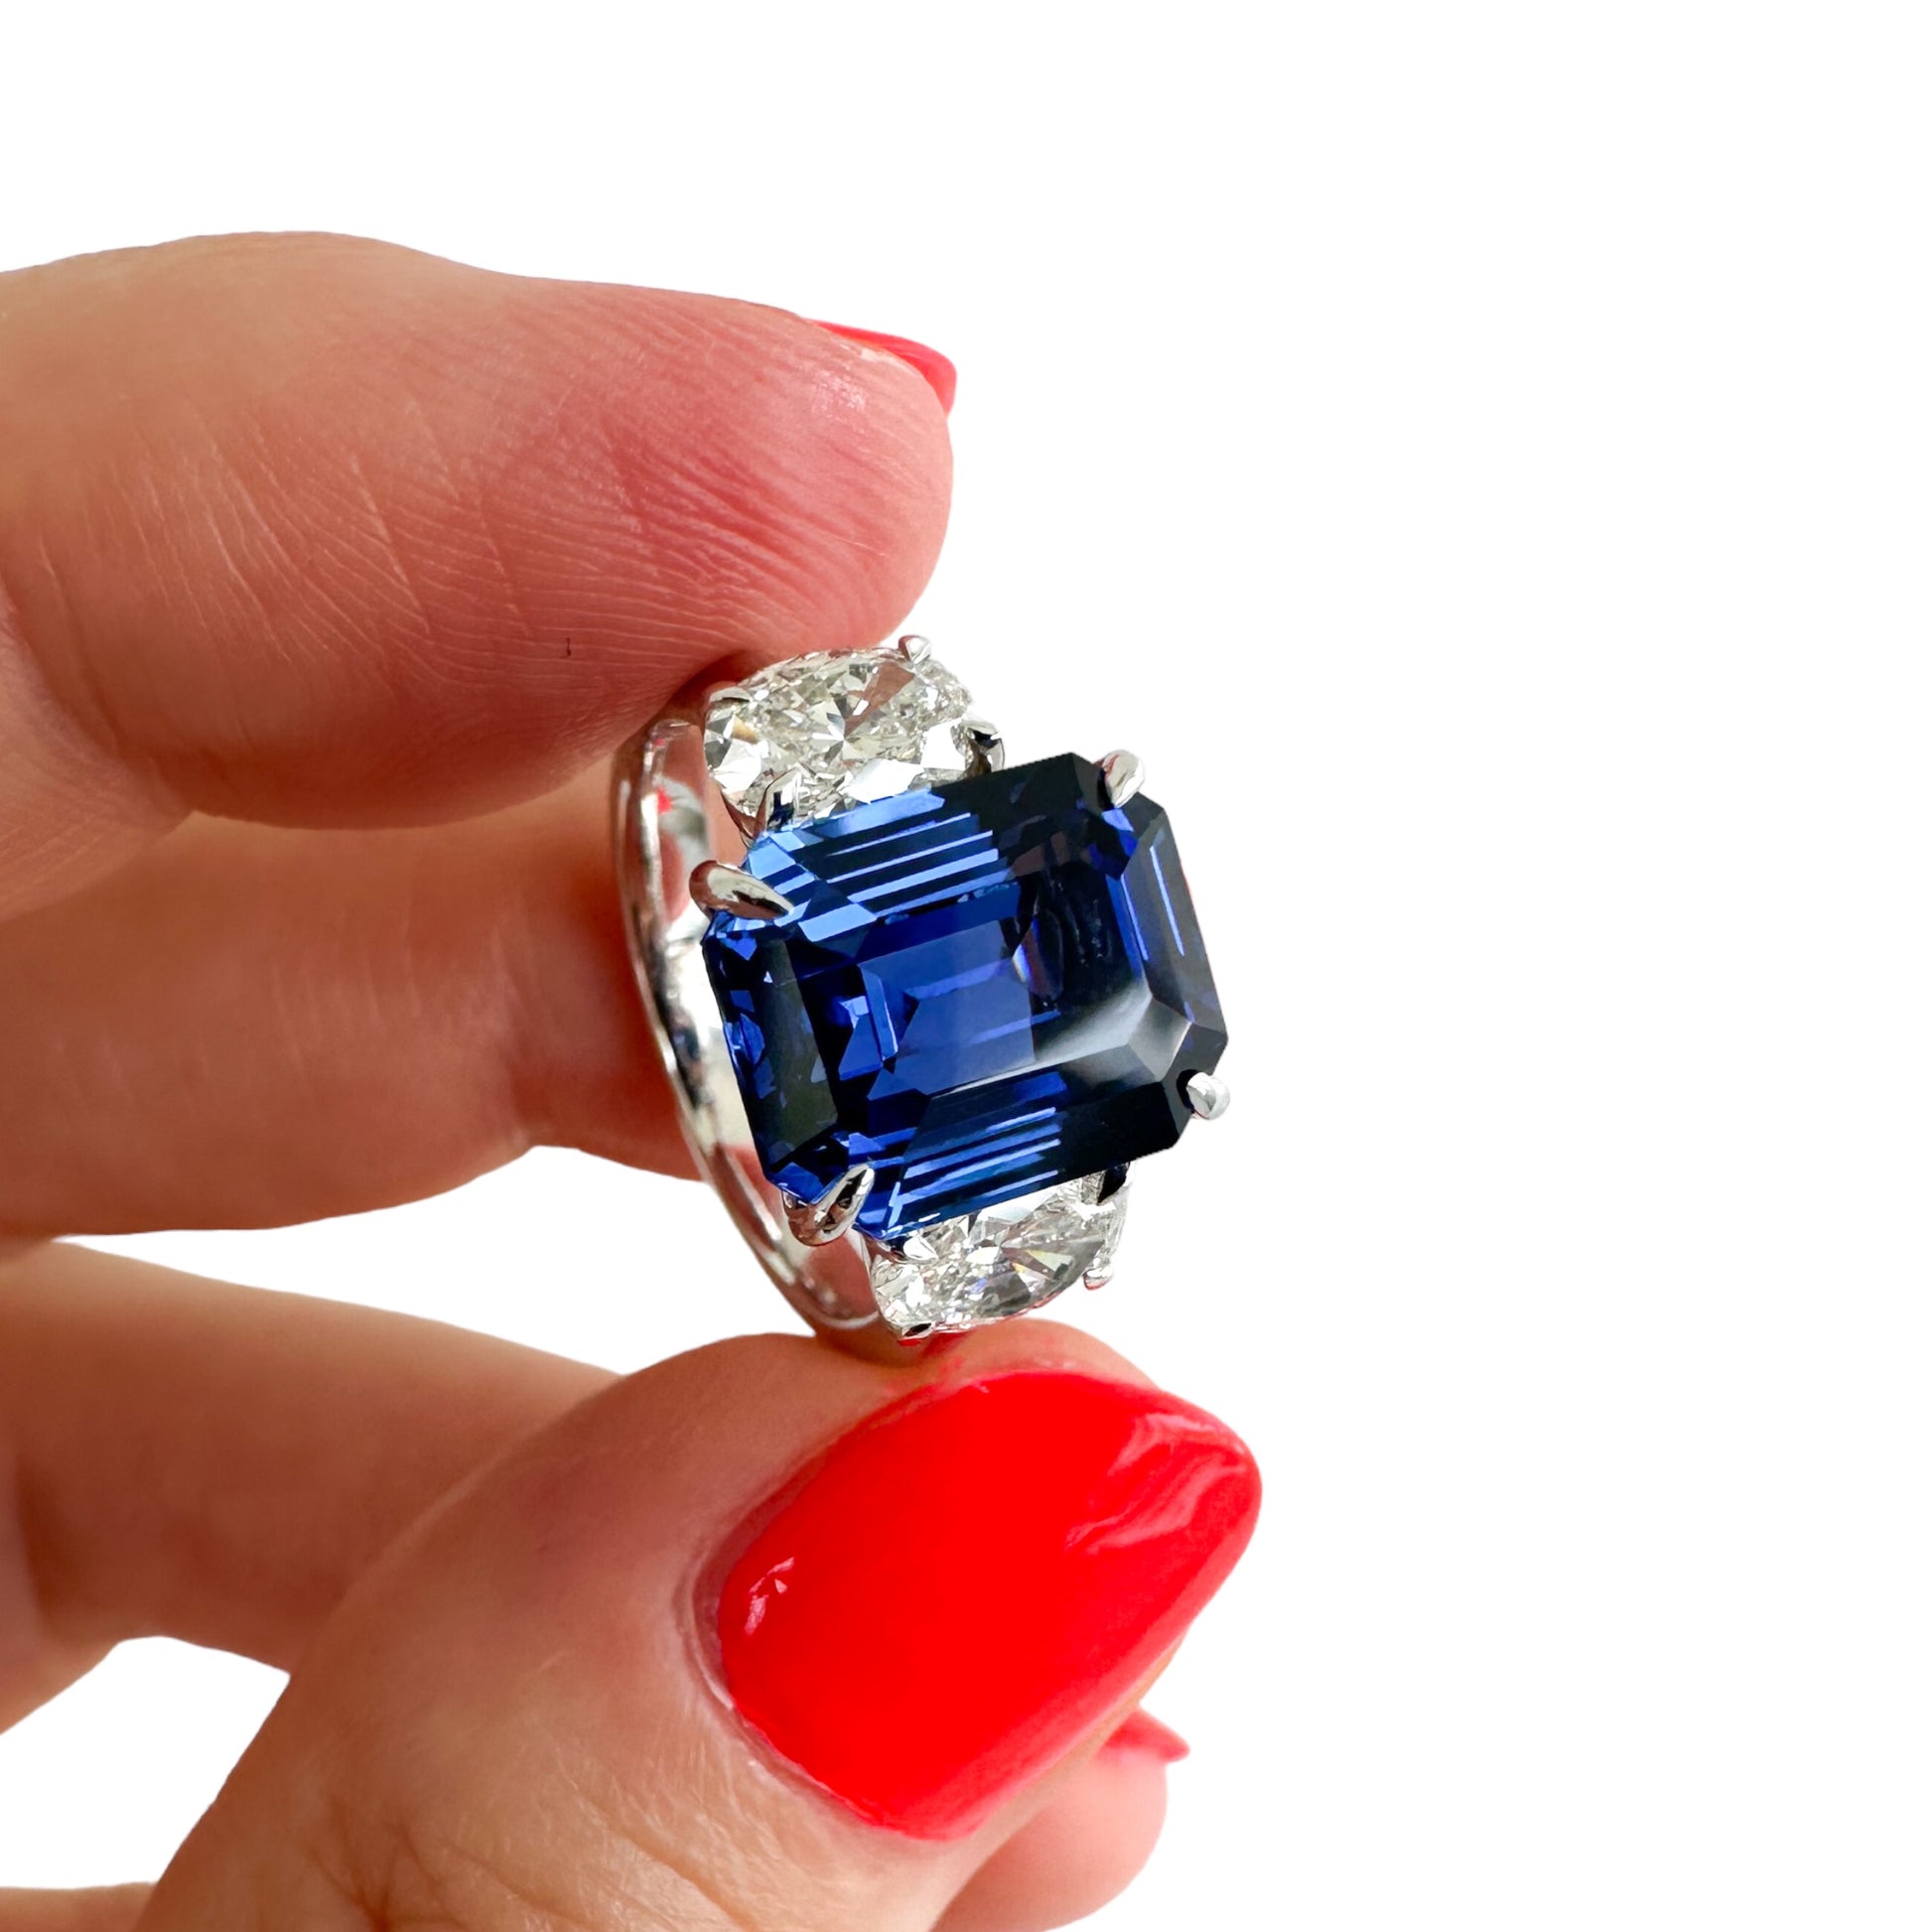 Certified blue sapphire and diamond ring, sapphire engagement ring, emerald cut sapphire ring, oval diamond and sapphire ring, Hong Kong USA UK Australia New Zealand. Bespoke fine jewellery and rings